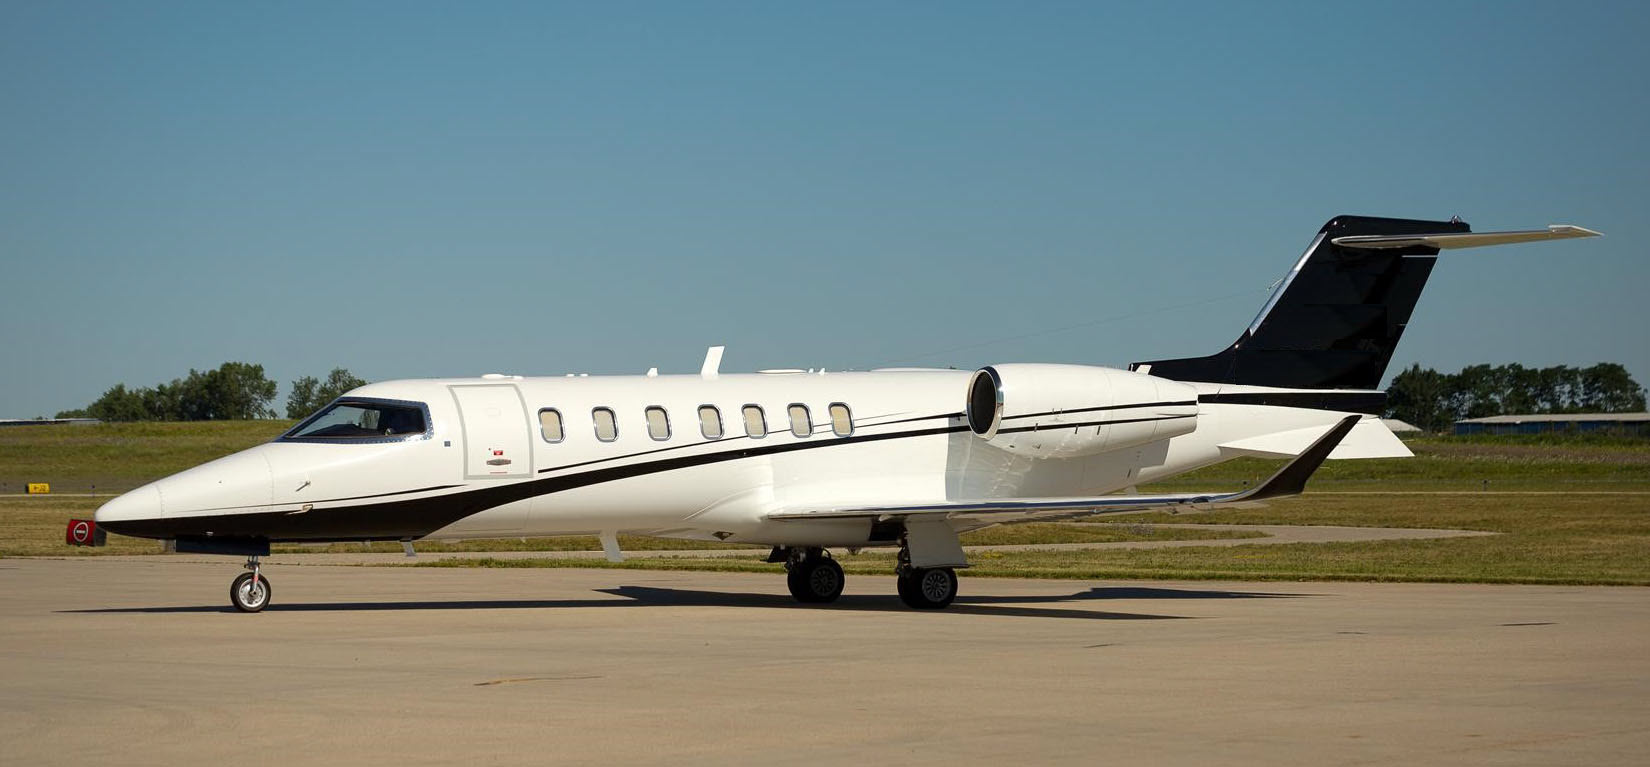 2016 Learjet 70 is an example of pre-owned jet aircraft that is in tight supply in Q42020 due to pre-election uncertainty and continuing concerns about Covid-19.